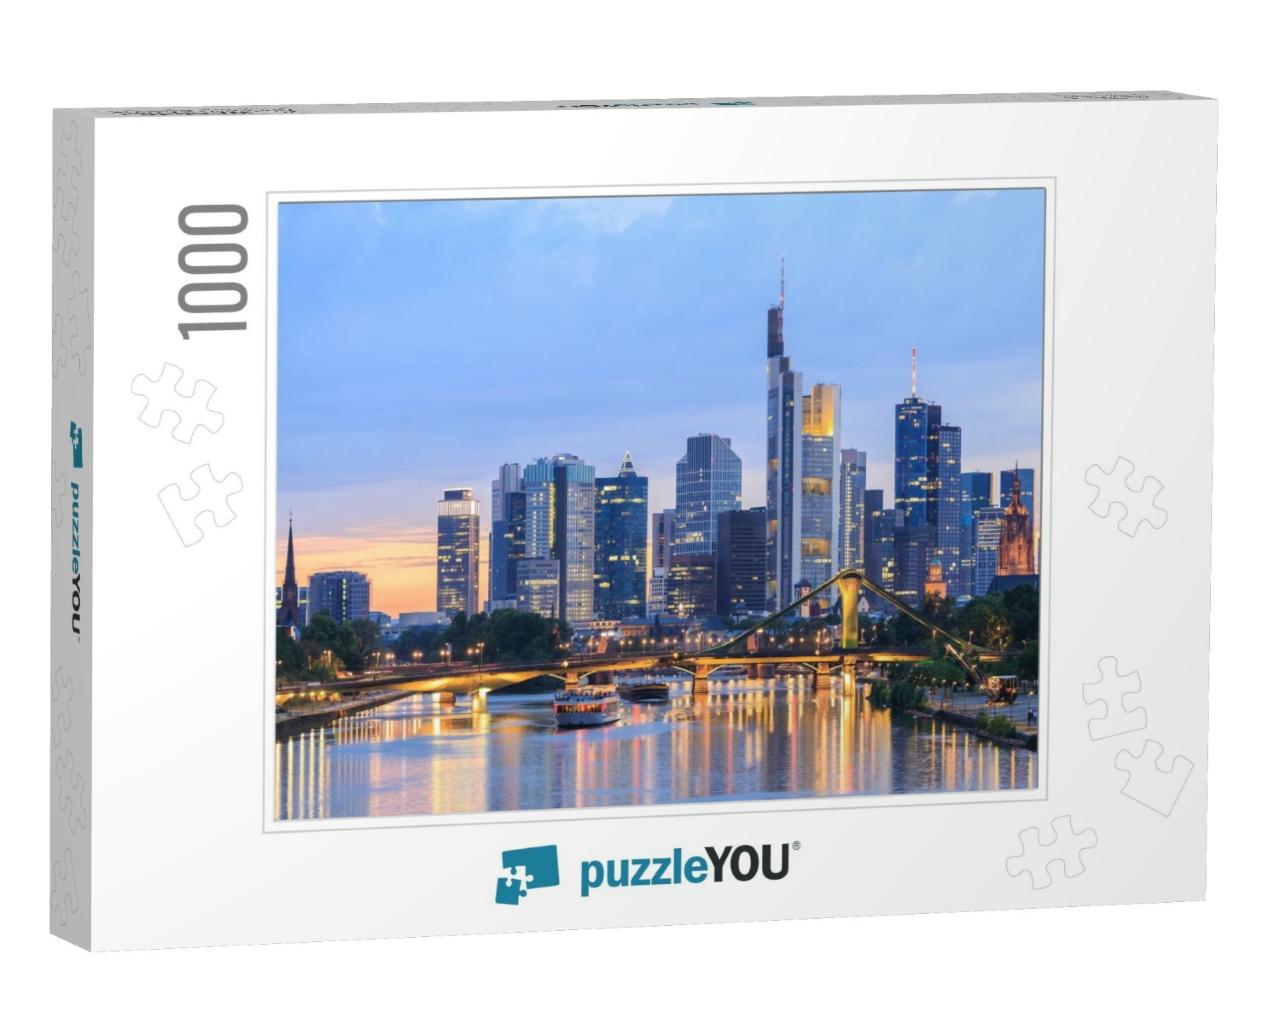 View of Frankfurt Am Main Skyline At Dusk, Germany... Jigsaw Puzzle with 1000 pieces